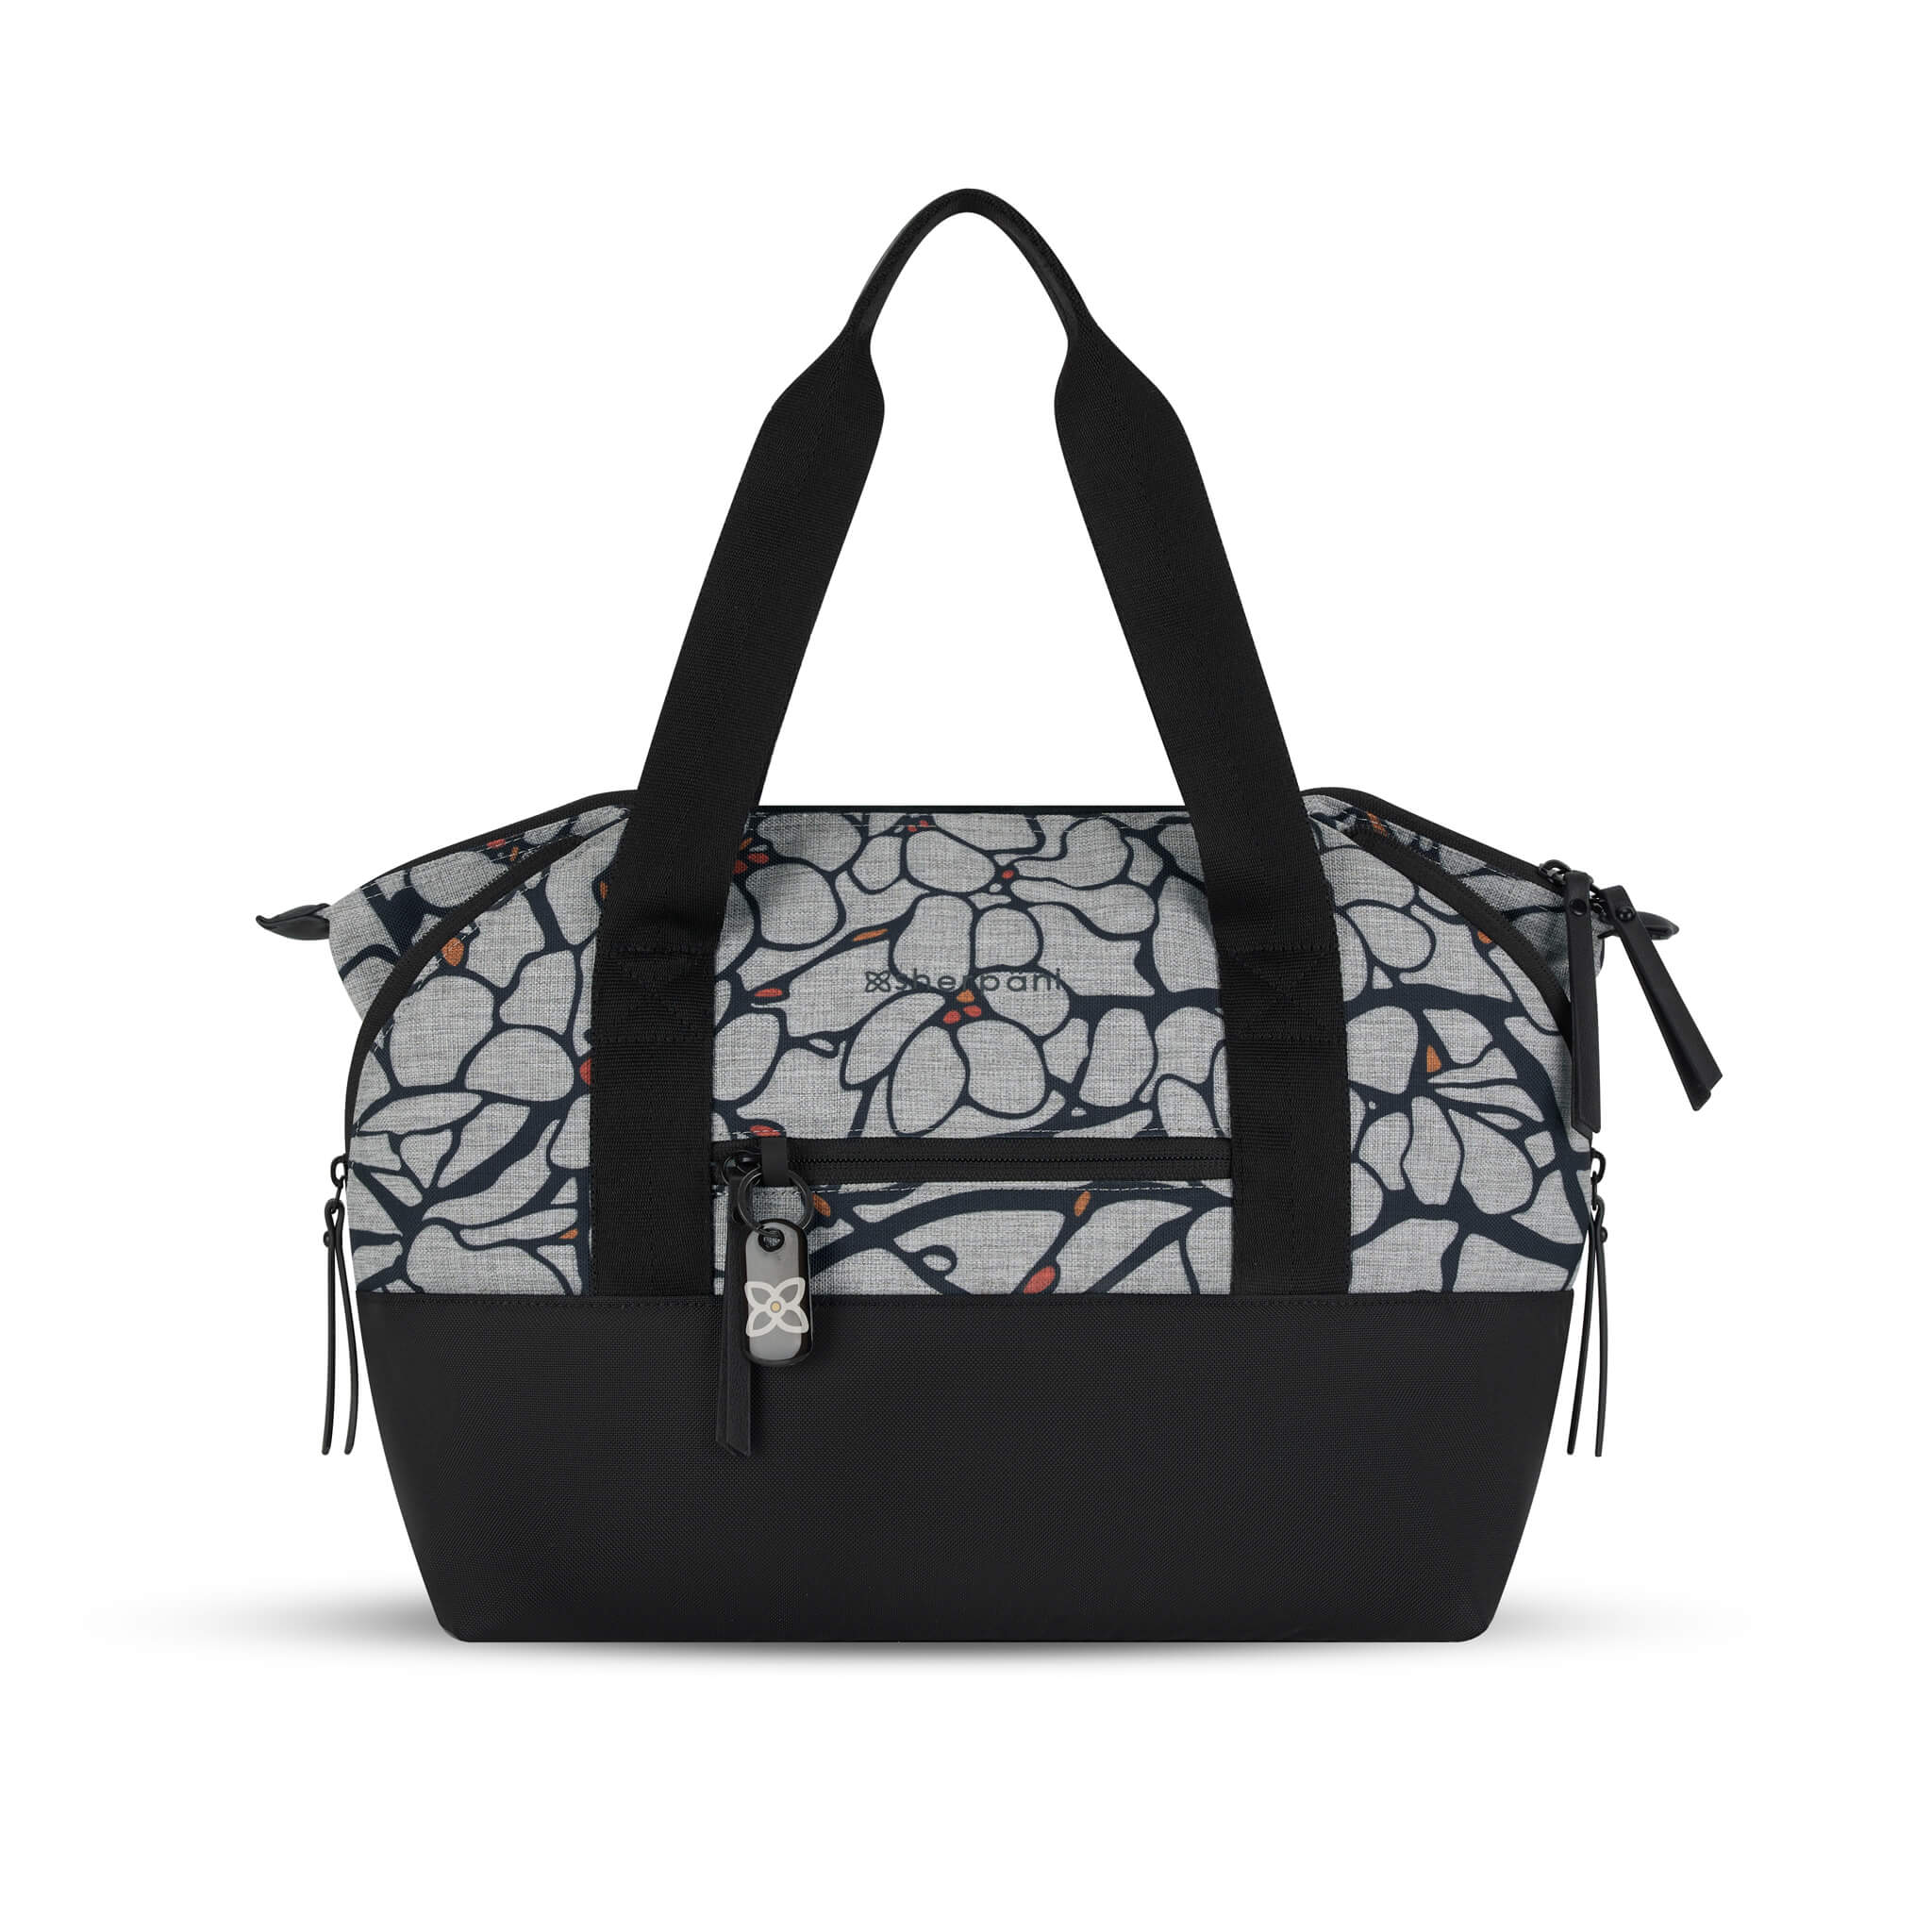 Flat front view of the Eclipse in Sakura. This travel tote features a zipper pocket in each corner which makes the Eclipse an expandable bag. This Anti-Theft purse is sustainably made from recycled materials including post consumer plastic and vegan leather. 